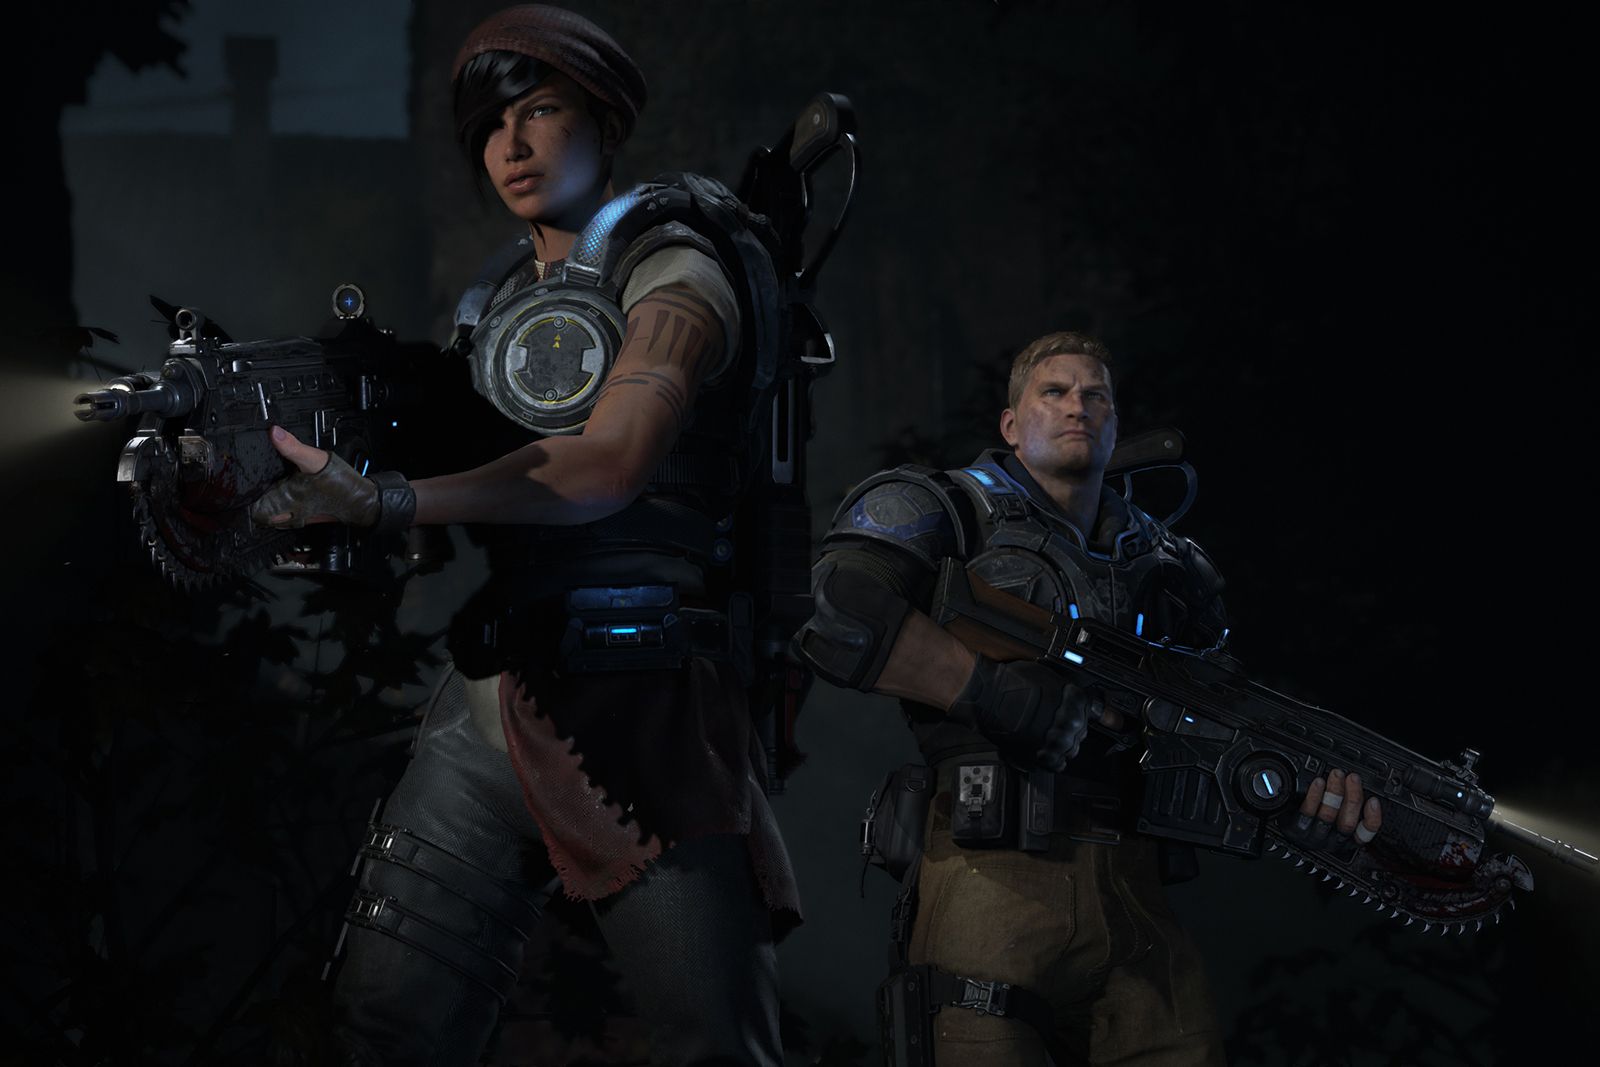 gears of war 4 review image 1